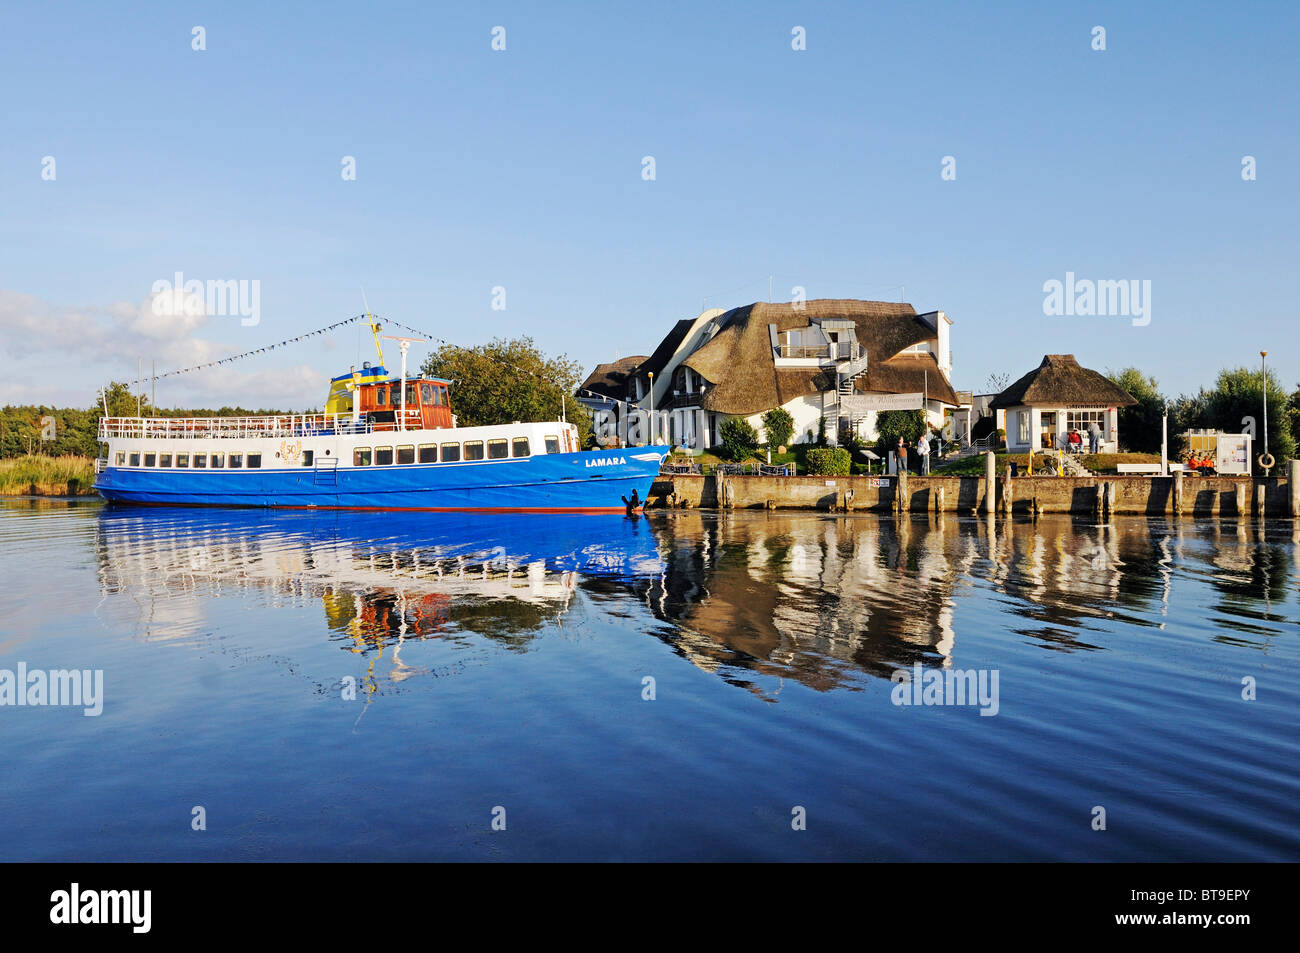 Hotel and tour boat in the harbor of the seaside resort of Baabe, Ruegen Island, Mecklenburg-Western Pomerania, Germany, Europe Stock Photo